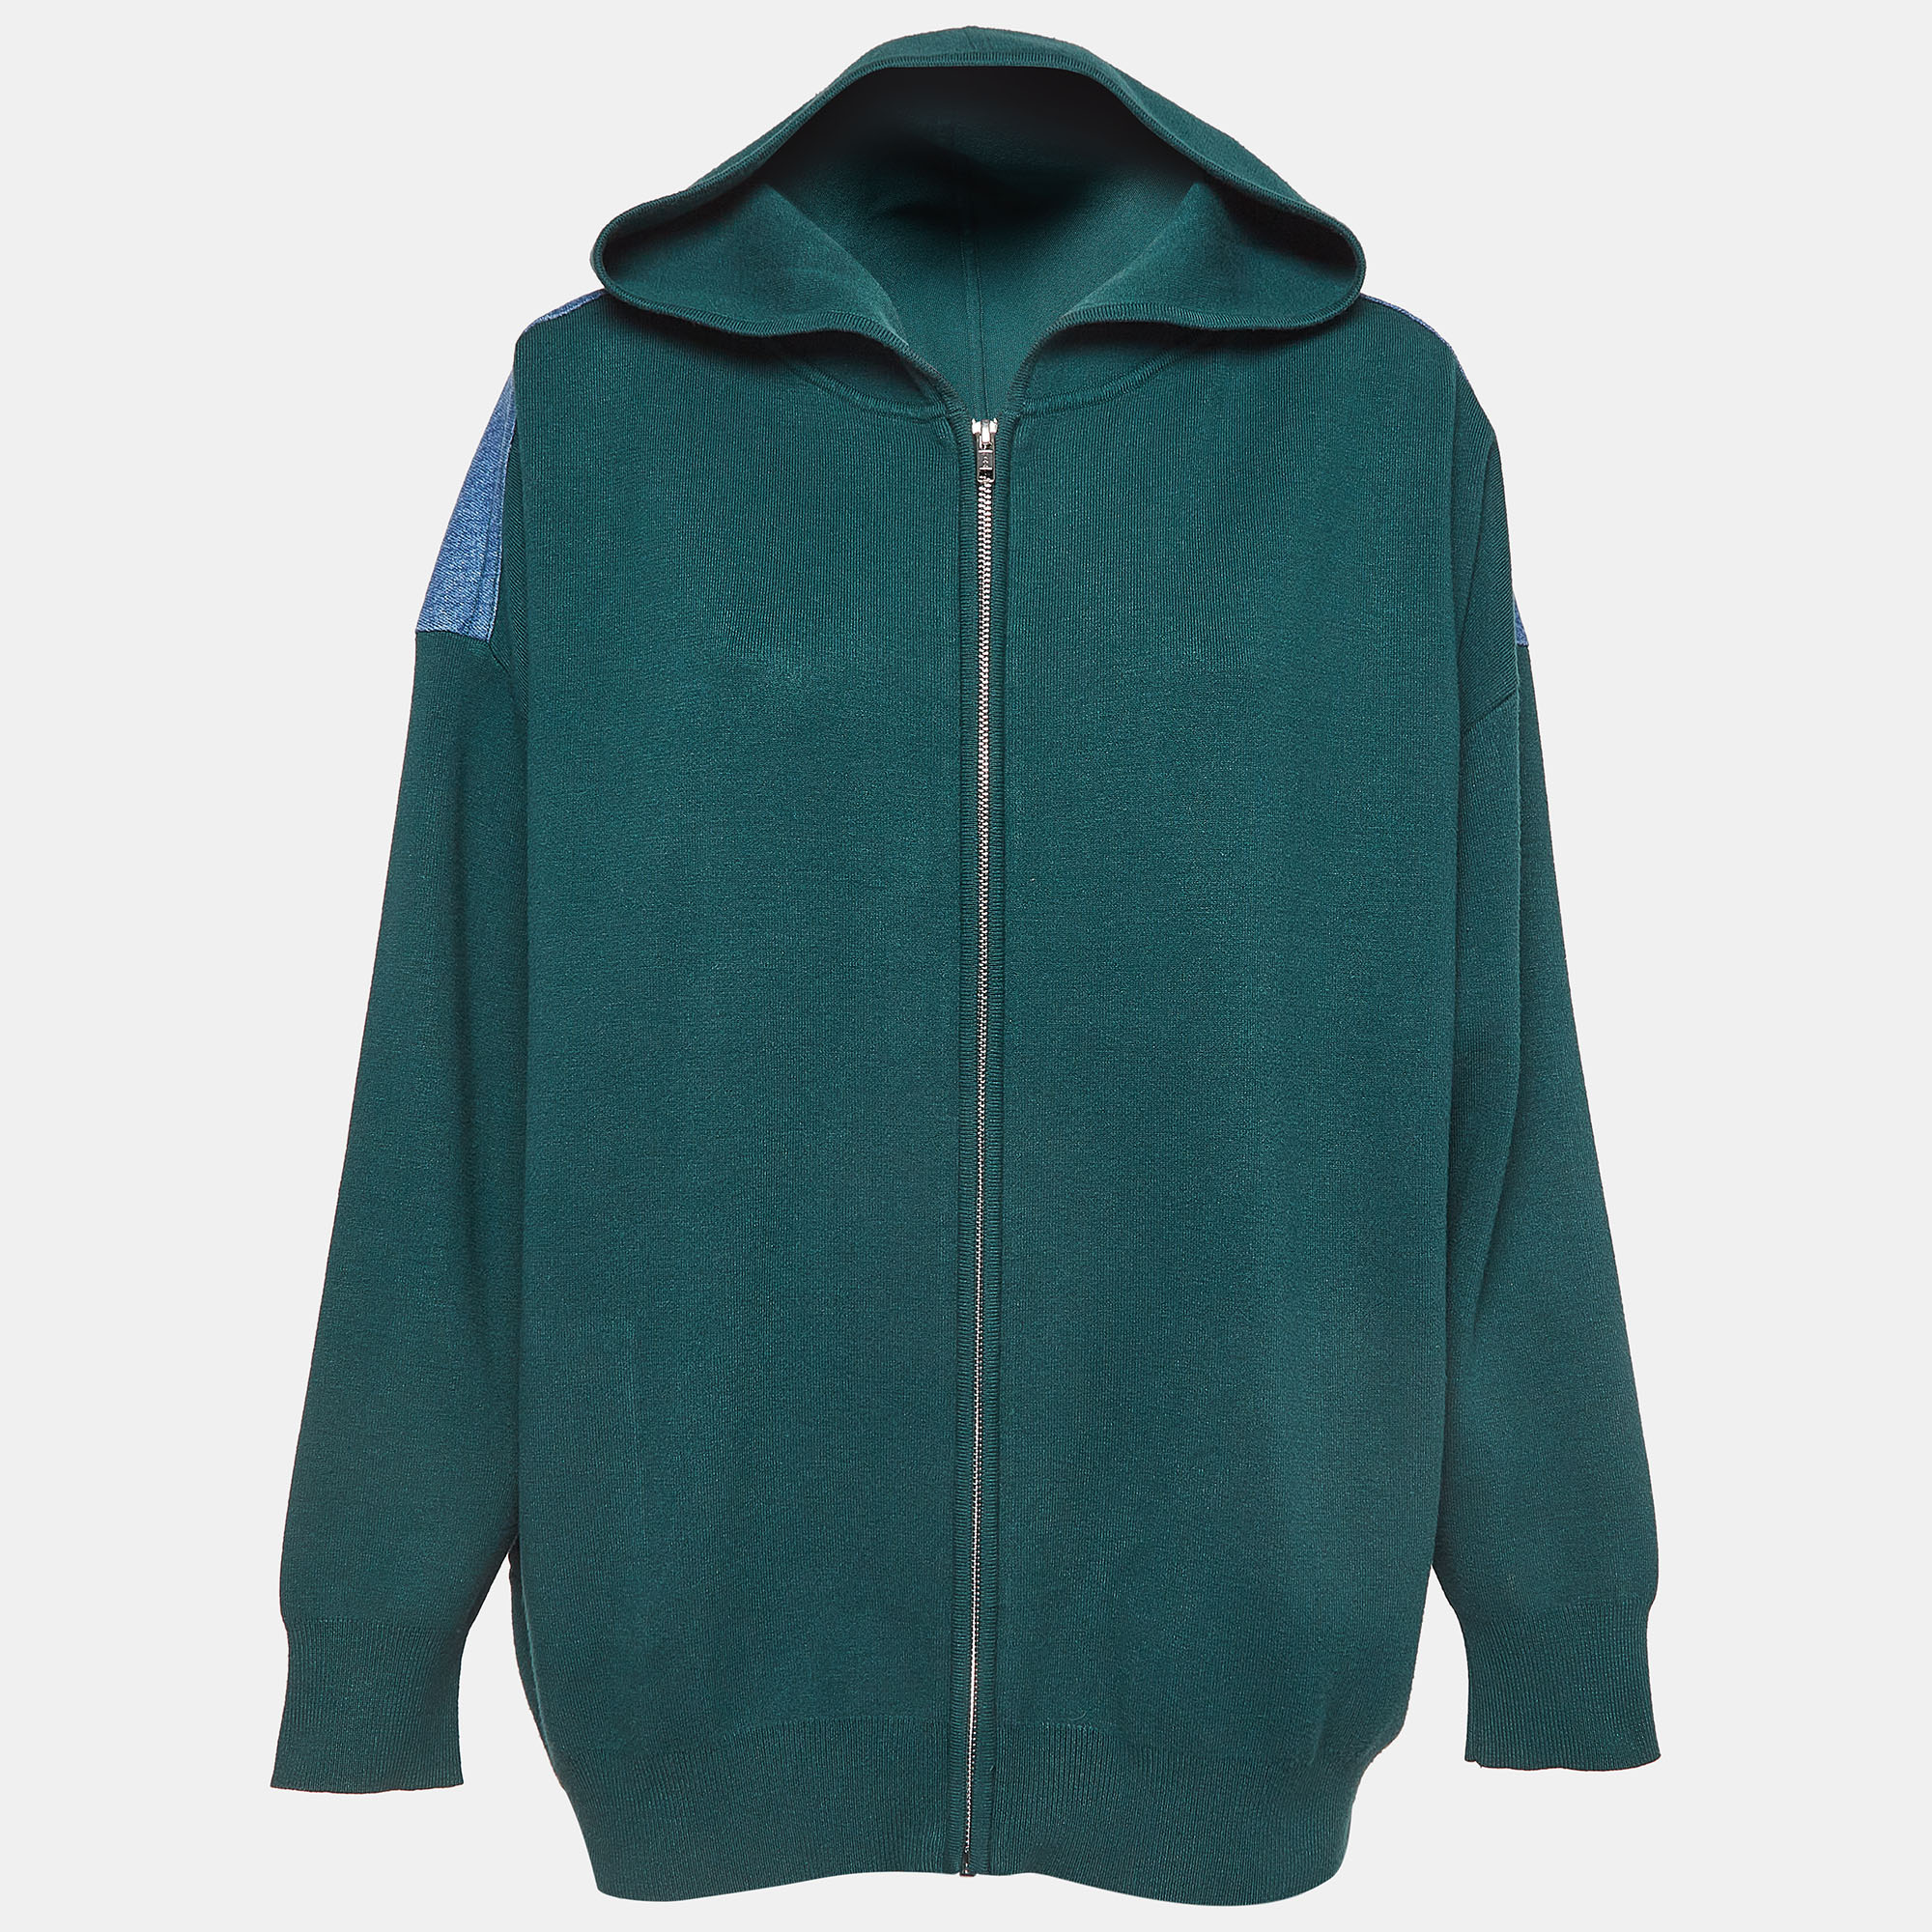 Introducing the Sandro hoodie-a fusion of comfort and style. Crafted with precision this hoodie boasts a cozy knit fabric blended seamlessly with denim accents. Its oversized silhouette exudes effortless coolness while the rich green hue adds a pop of personality to any ensemble.